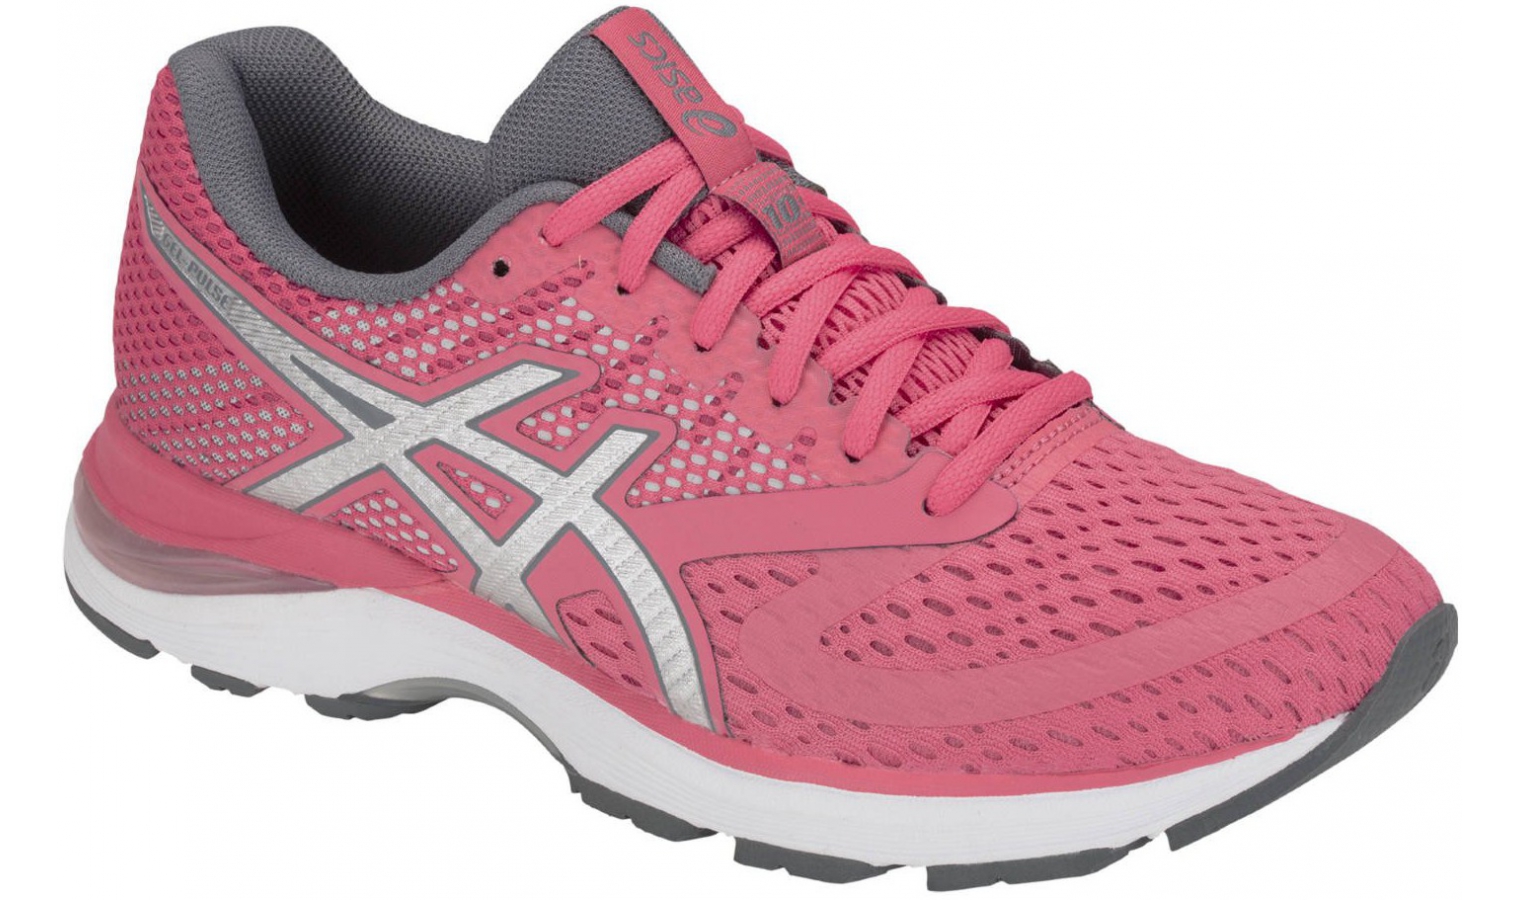 running shoes Asics GEL-PULSE 10 pink | AD Sport.store